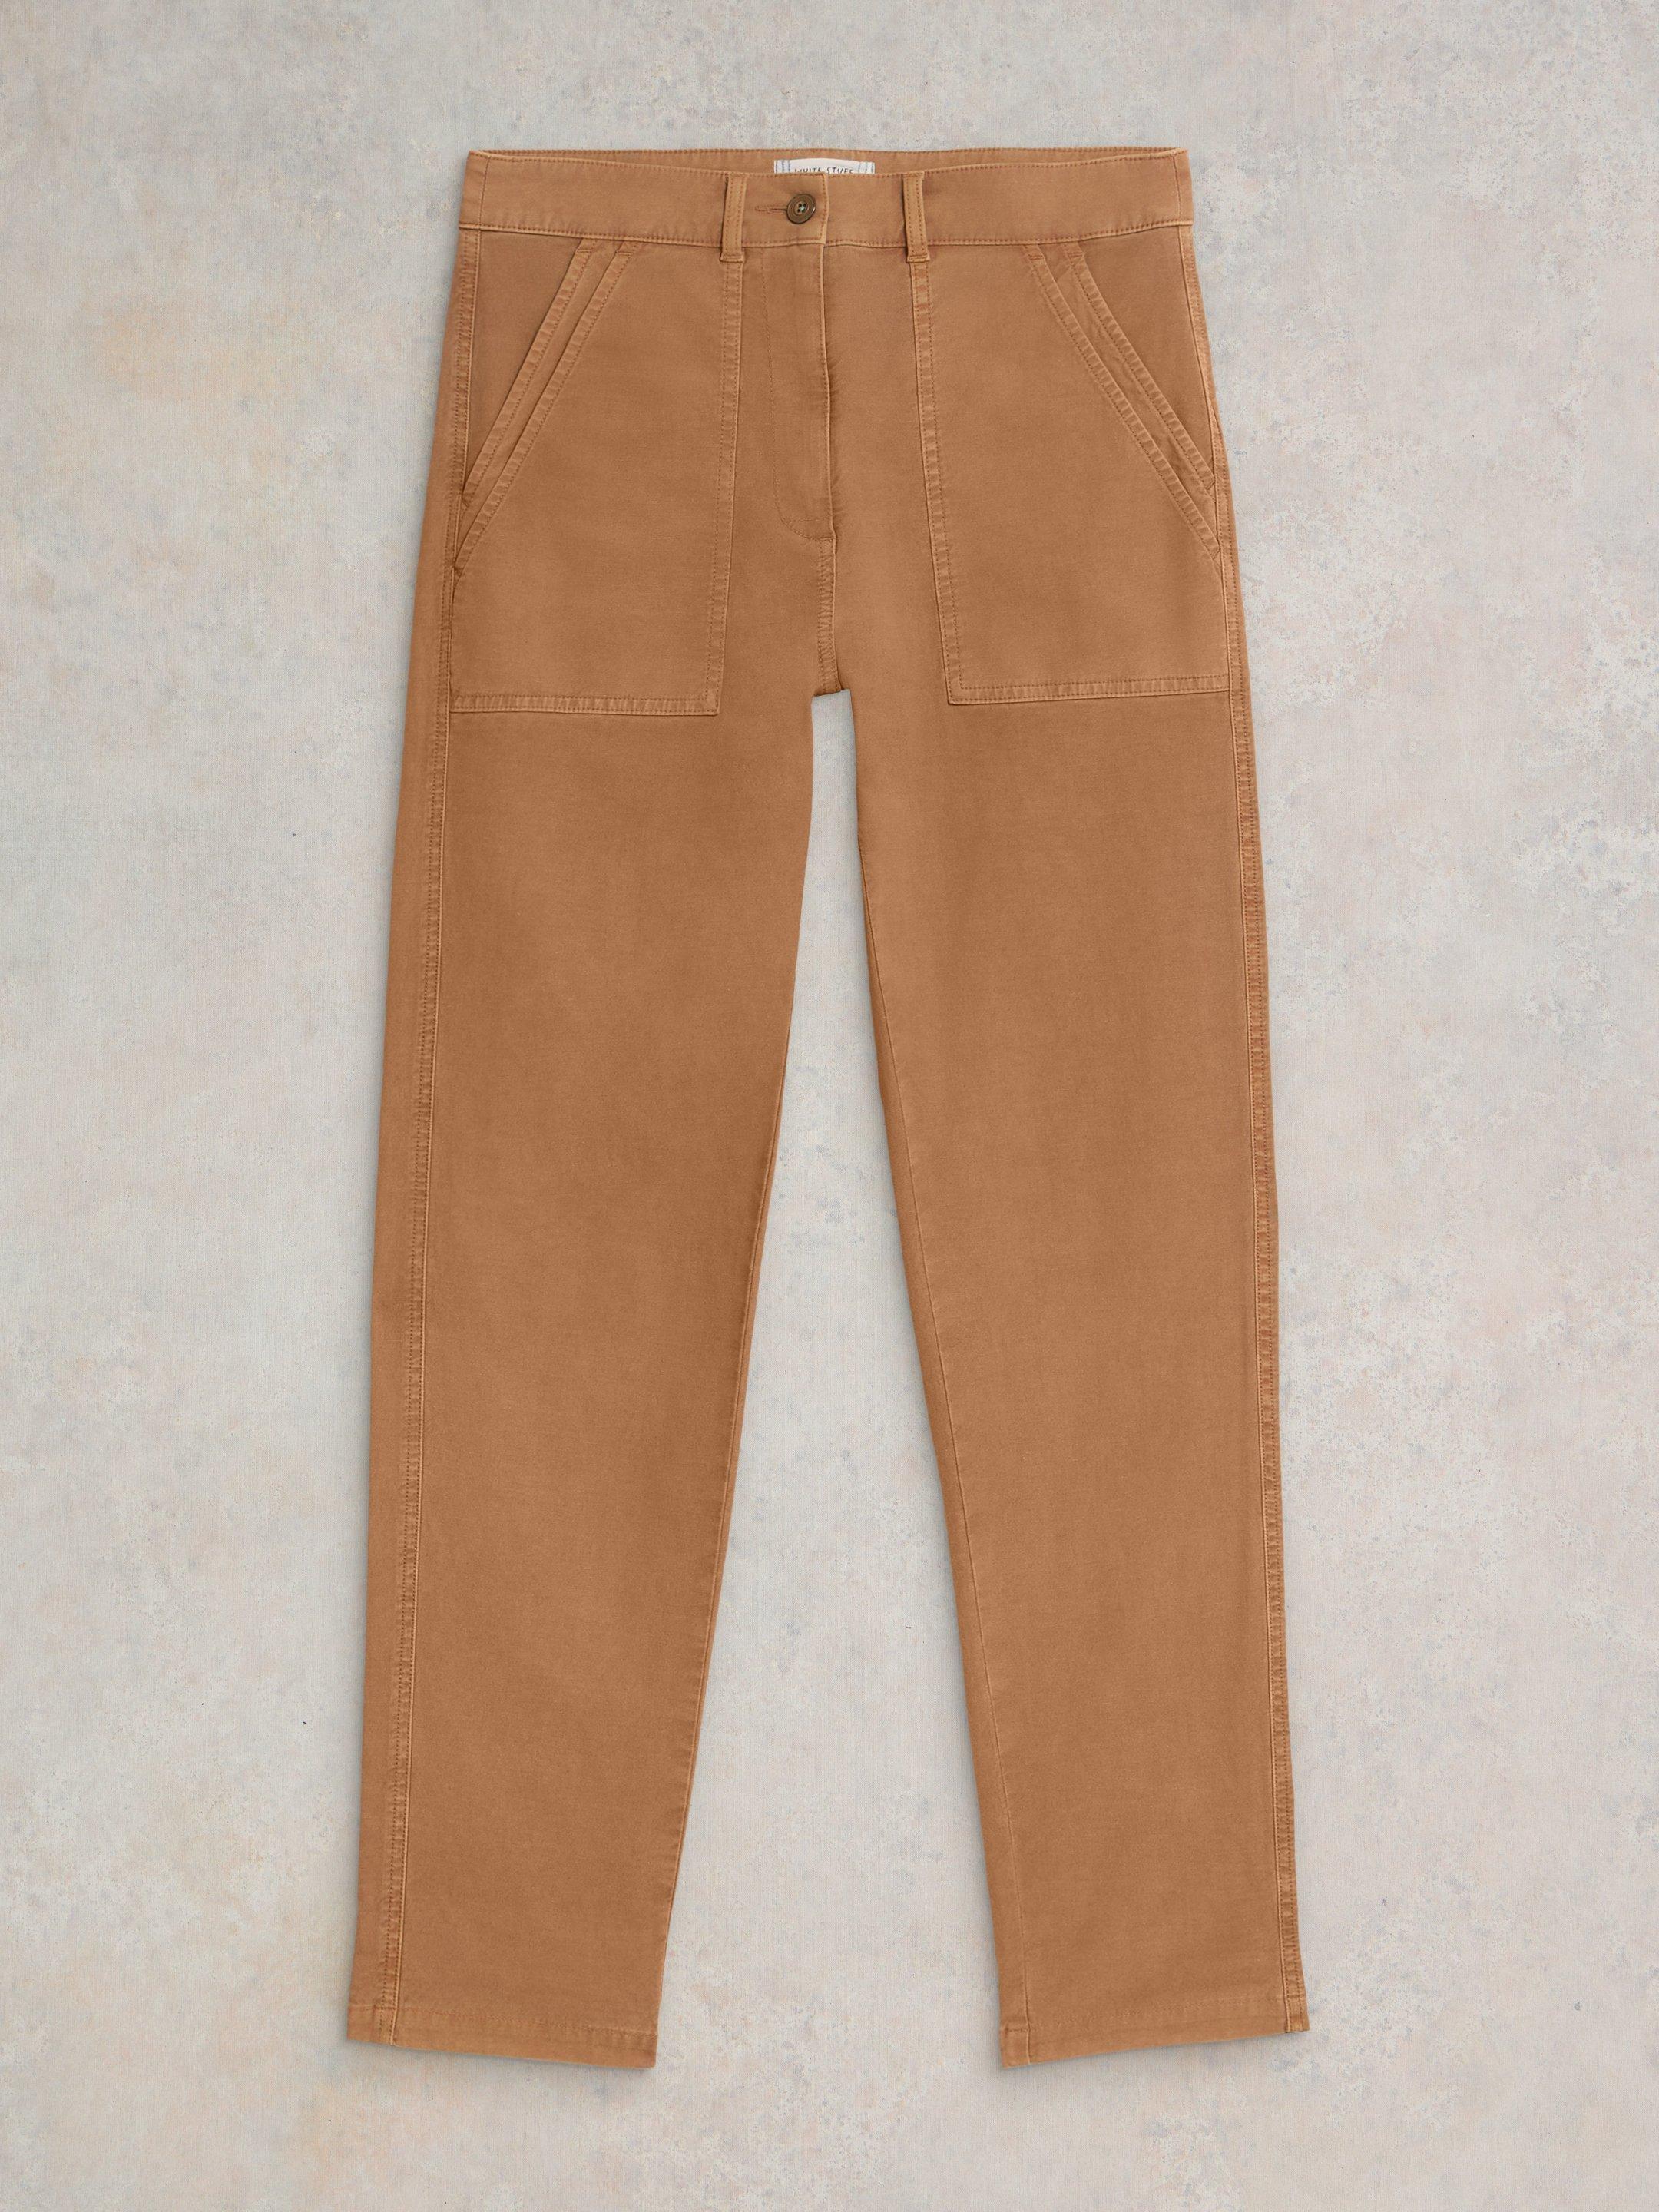 Twister Chino in MID TAN - FLAT FRONT